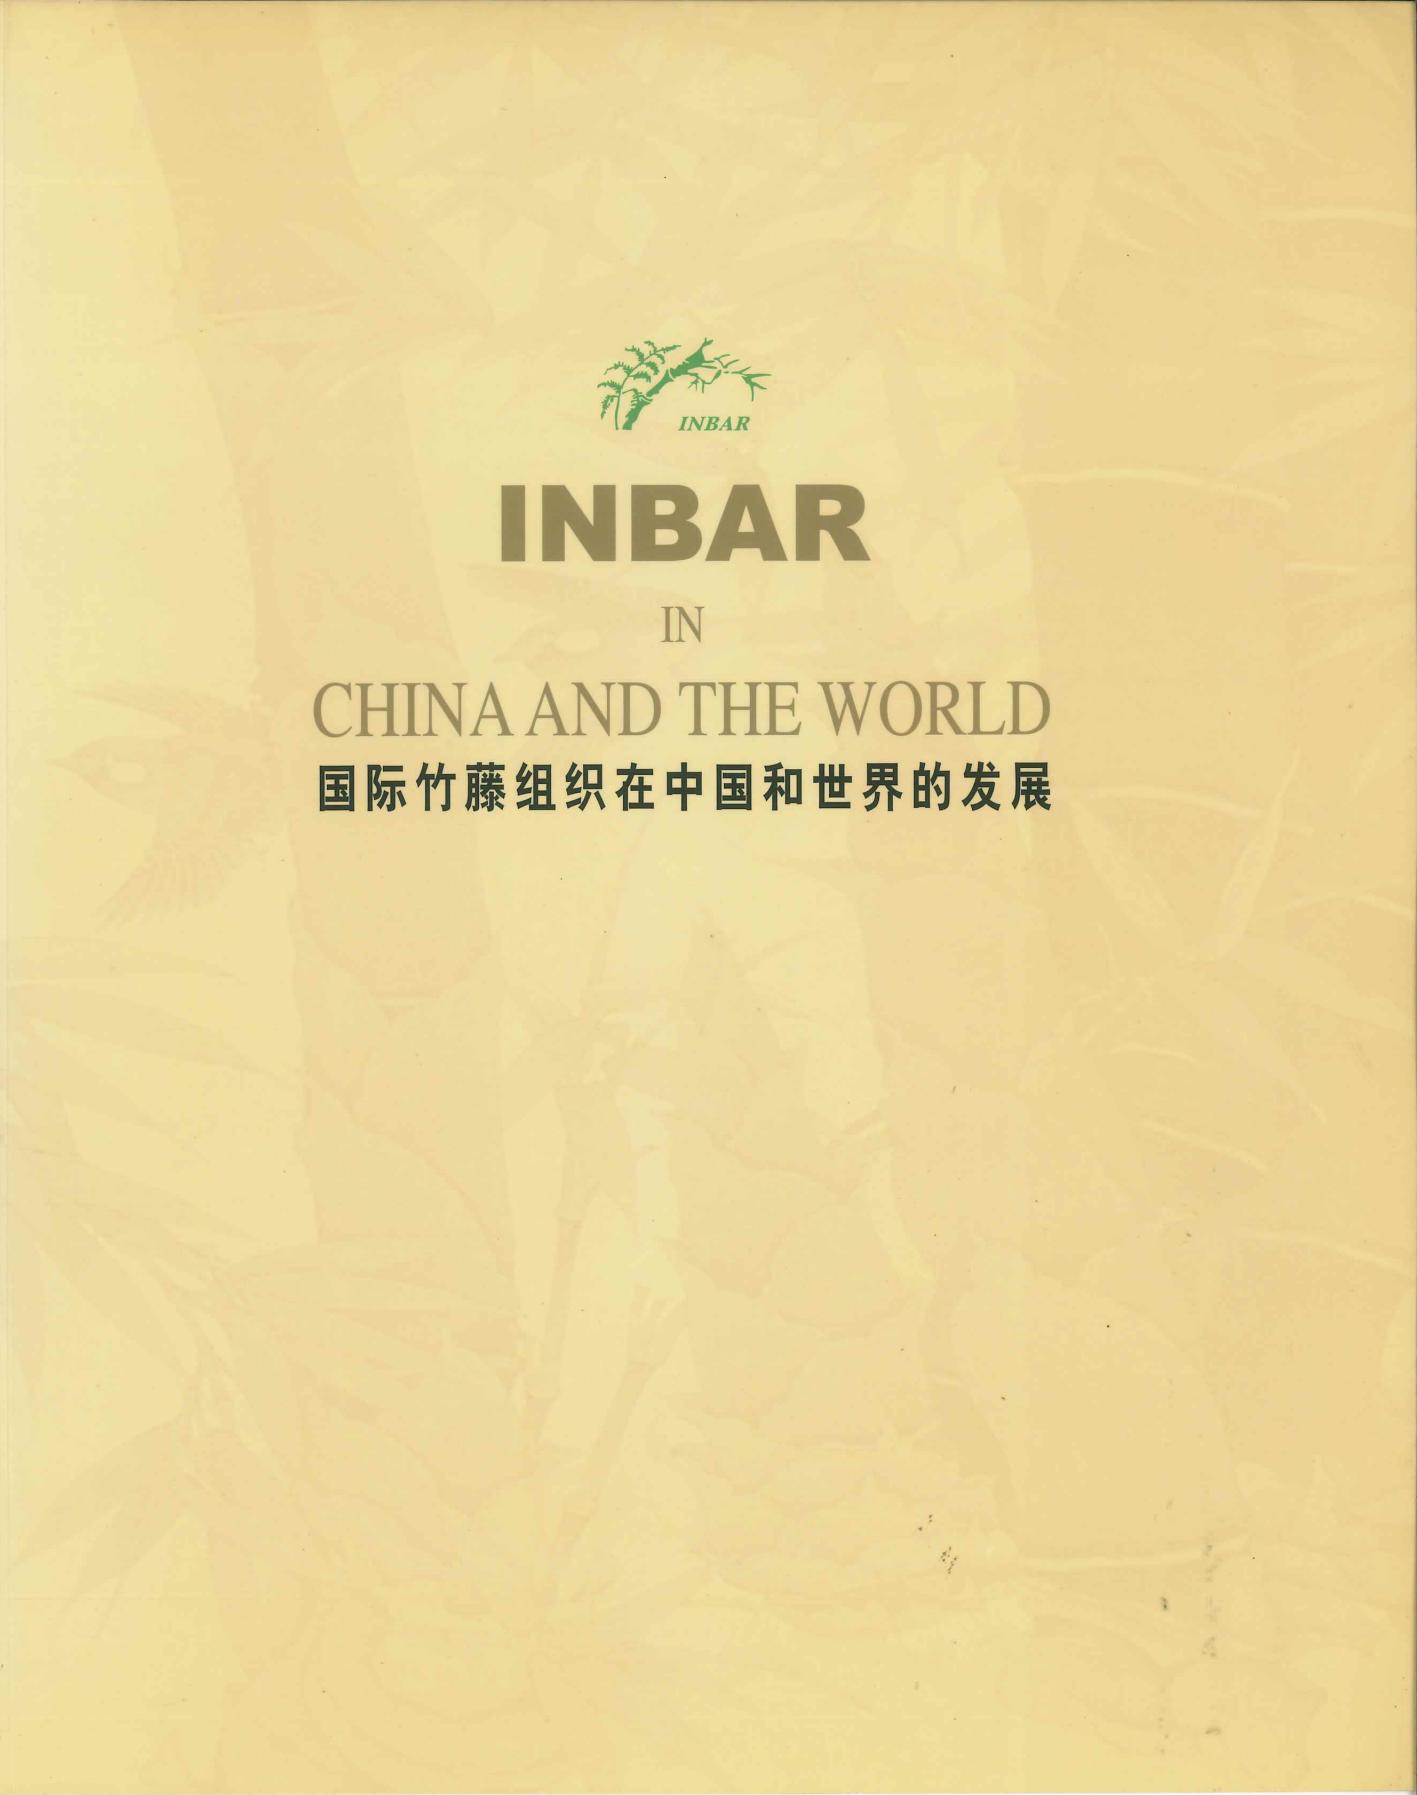 INBAR IN CHINA AND THE WORLD